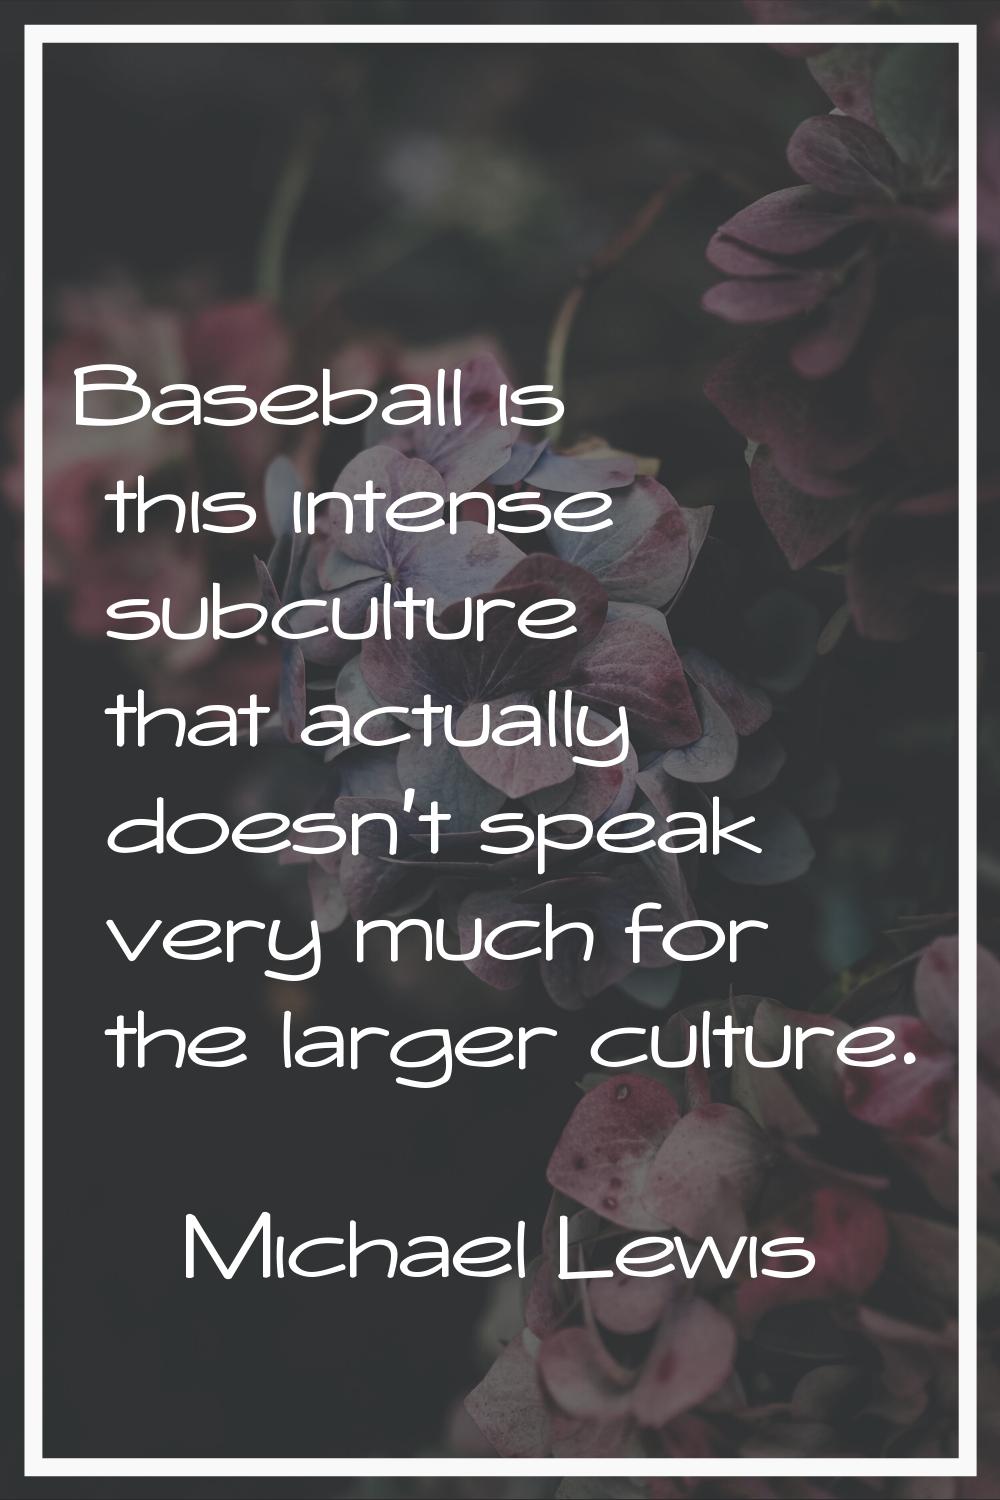 Baseball is this intense subculture that actually doesn't speak very much for the larger culture.